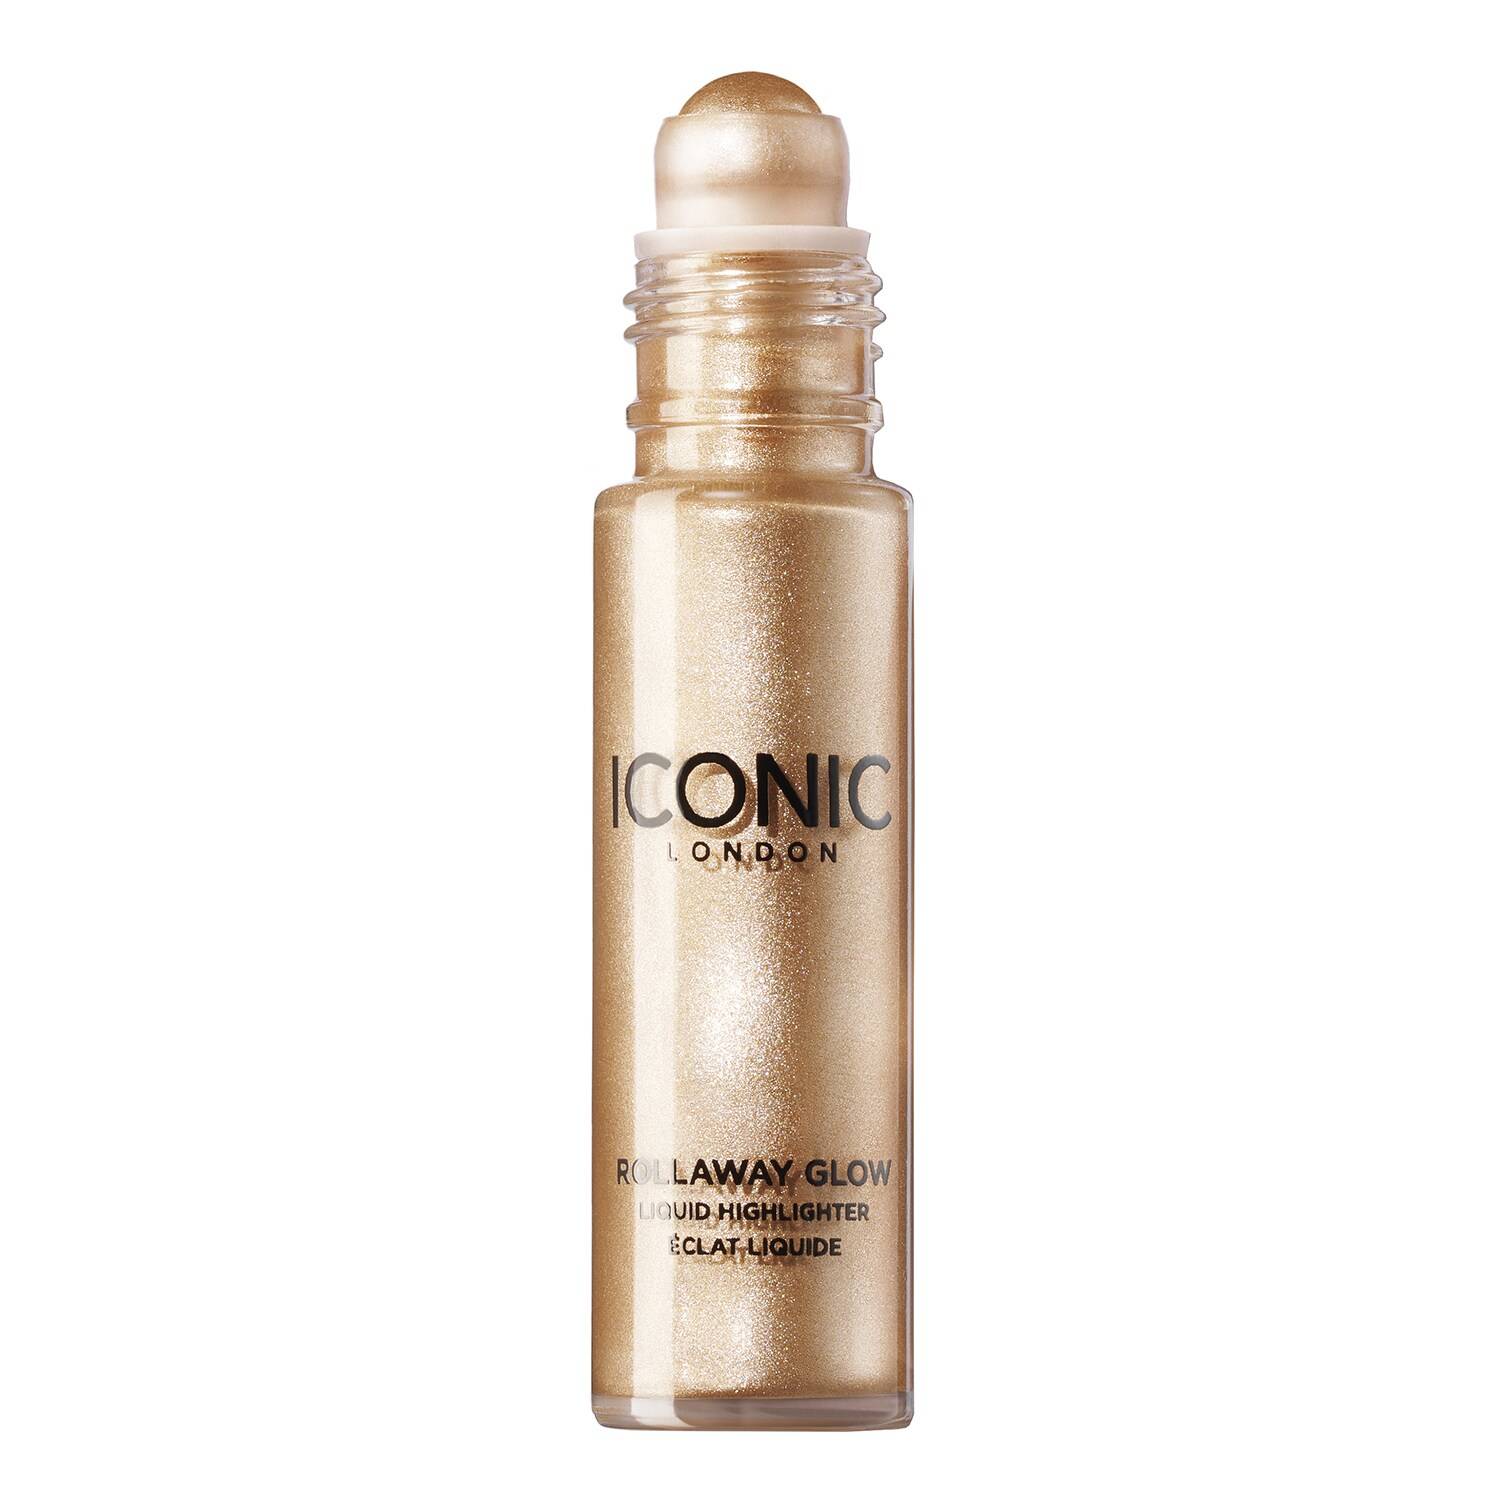 Iconic London Rollaway Glow 8Ml - Sephora Exclusive Champagne Chic